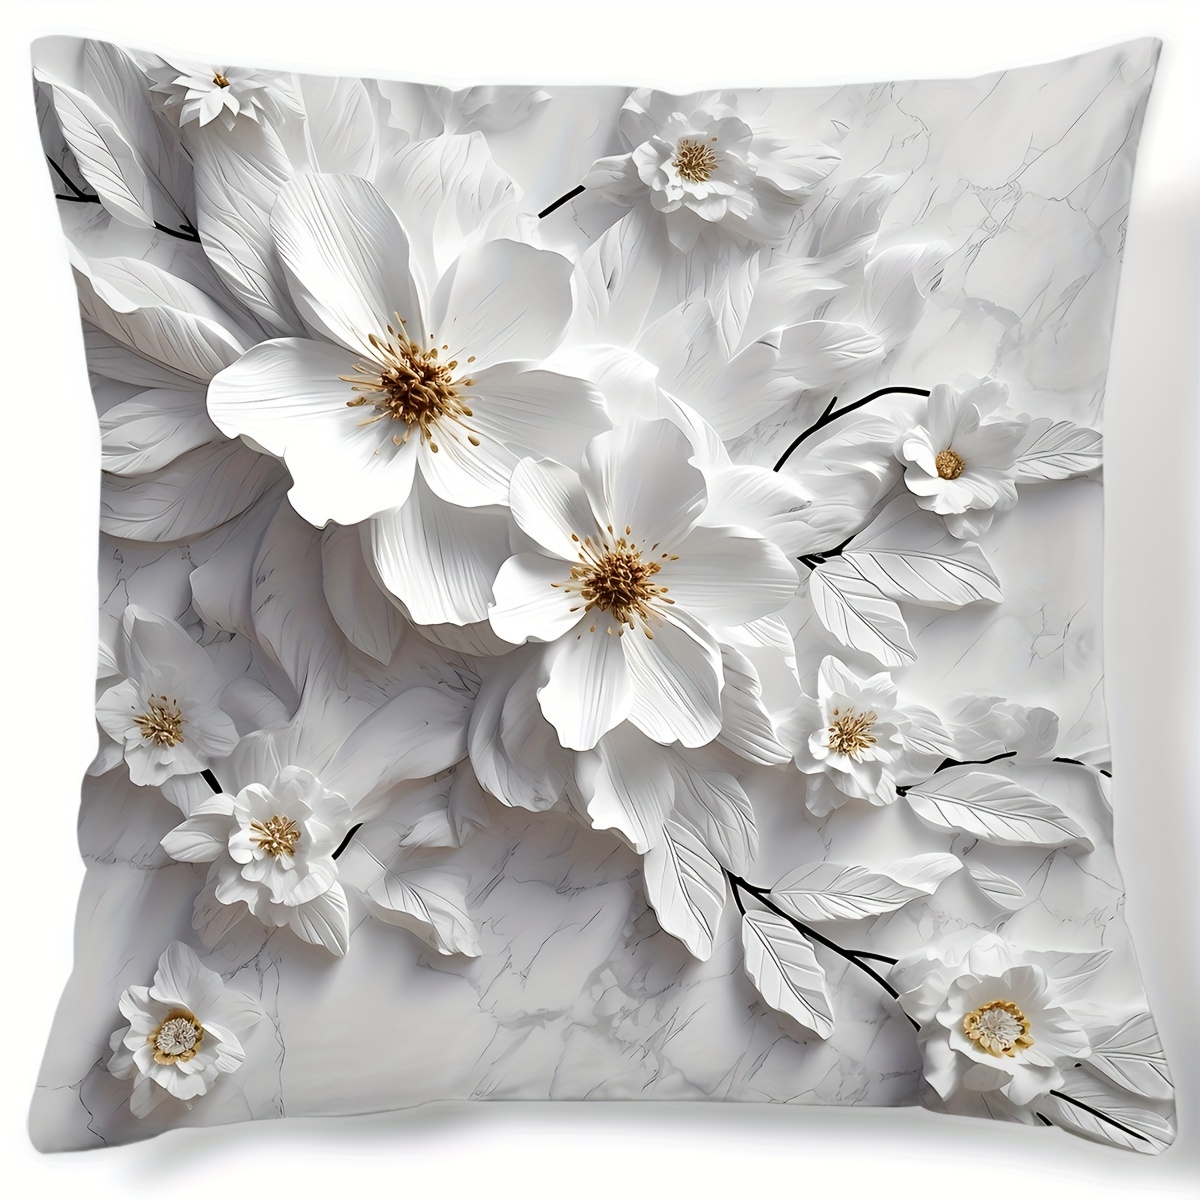 

Contemporary Polyester Throw Pillow Cover 17.7" - 3d Floral Digital Print, Hand Wash, Zippered Decorative Cushion Case For Sofa And Home Decor - 1pc